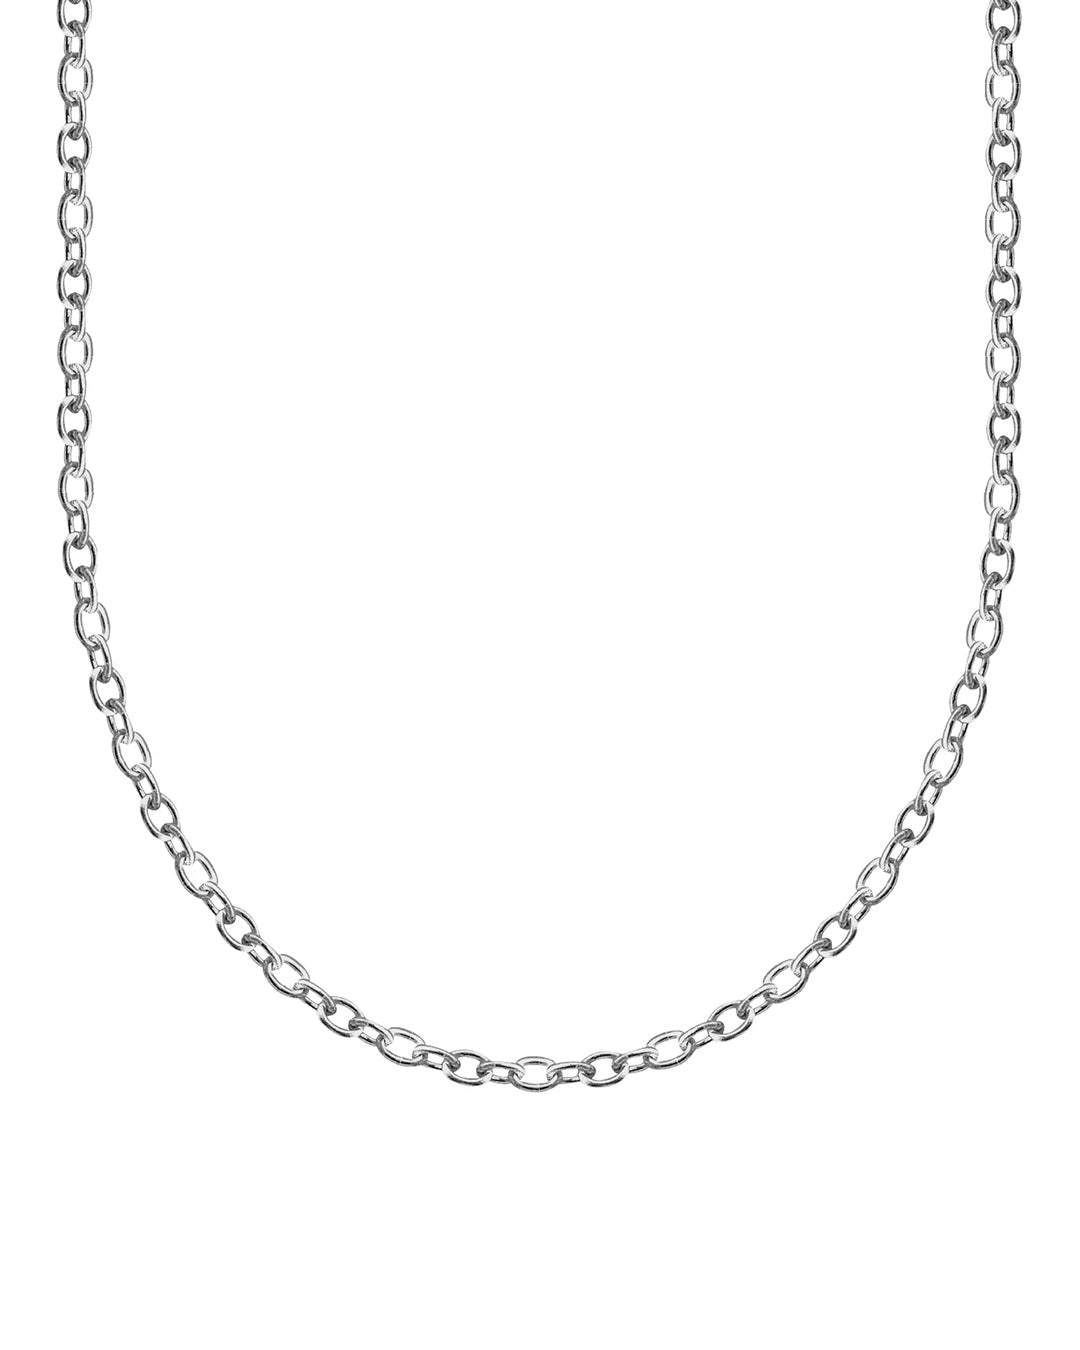 Oval Chain 3mm (Silver)